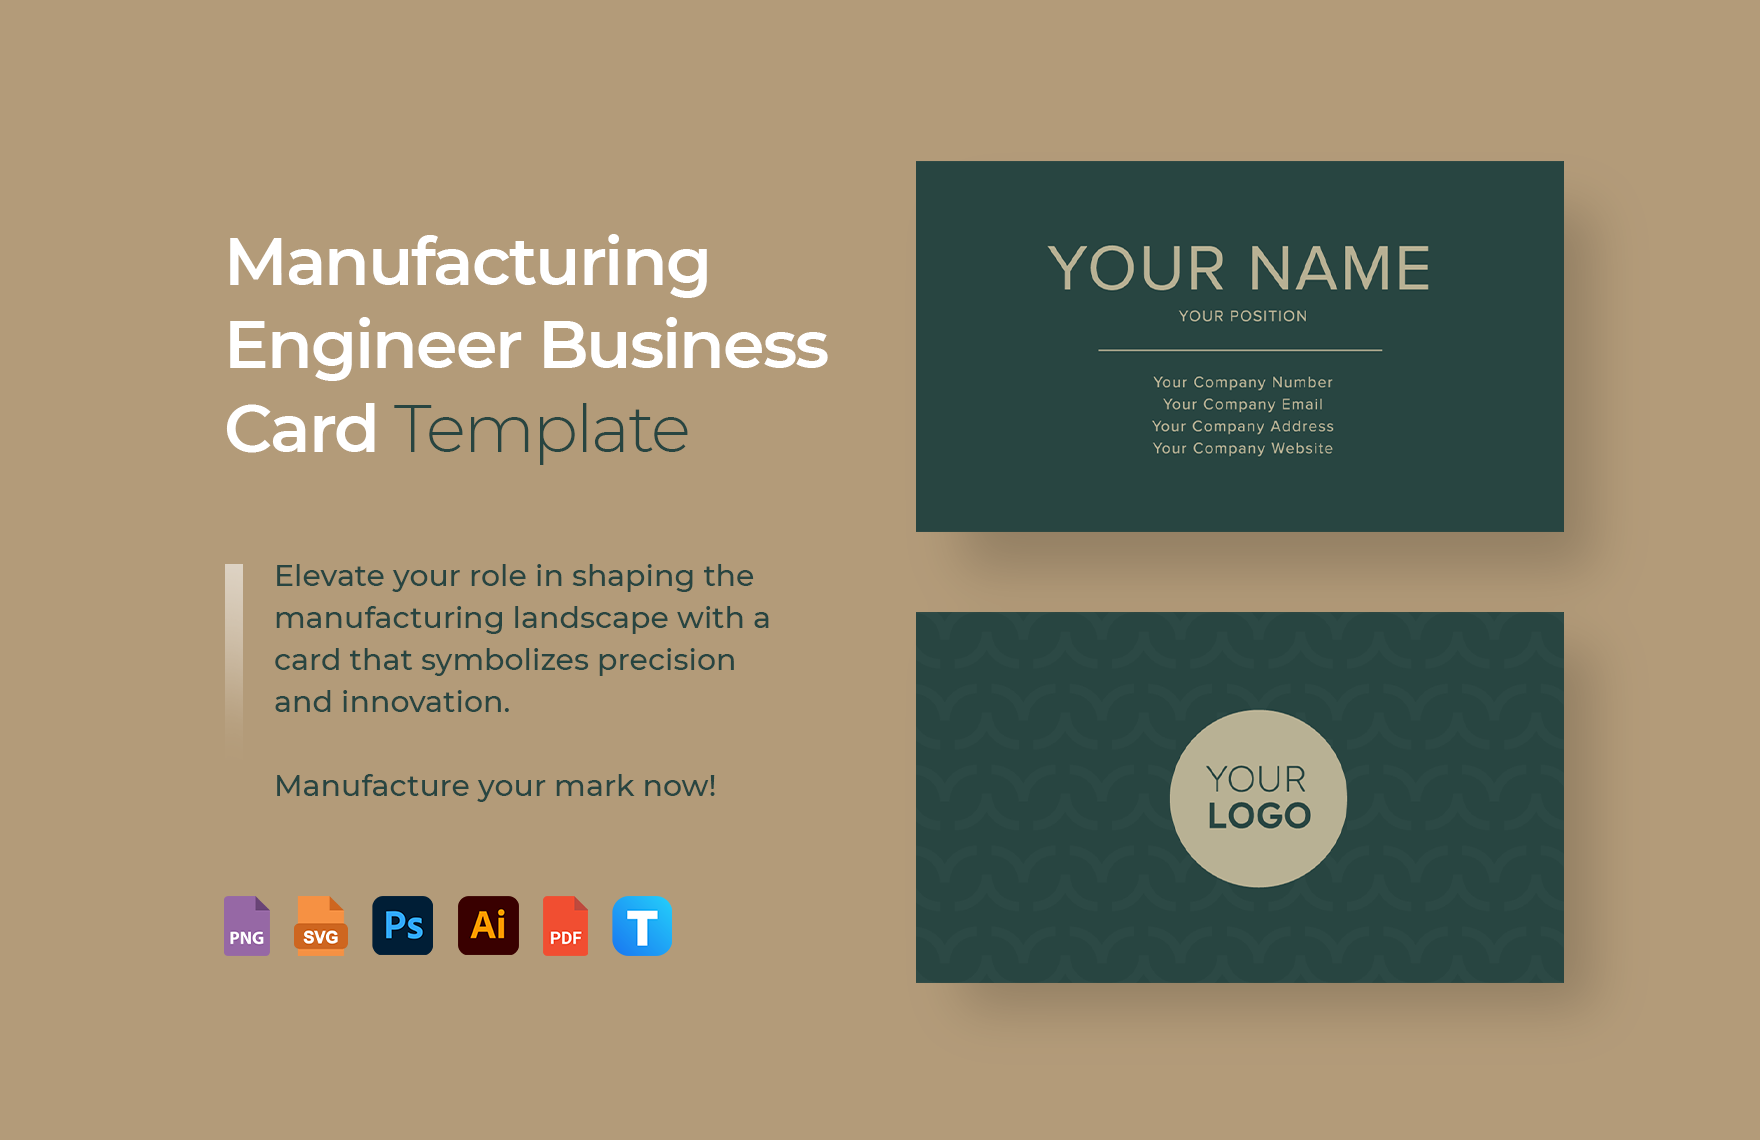 manufacturing-engineer-business-card